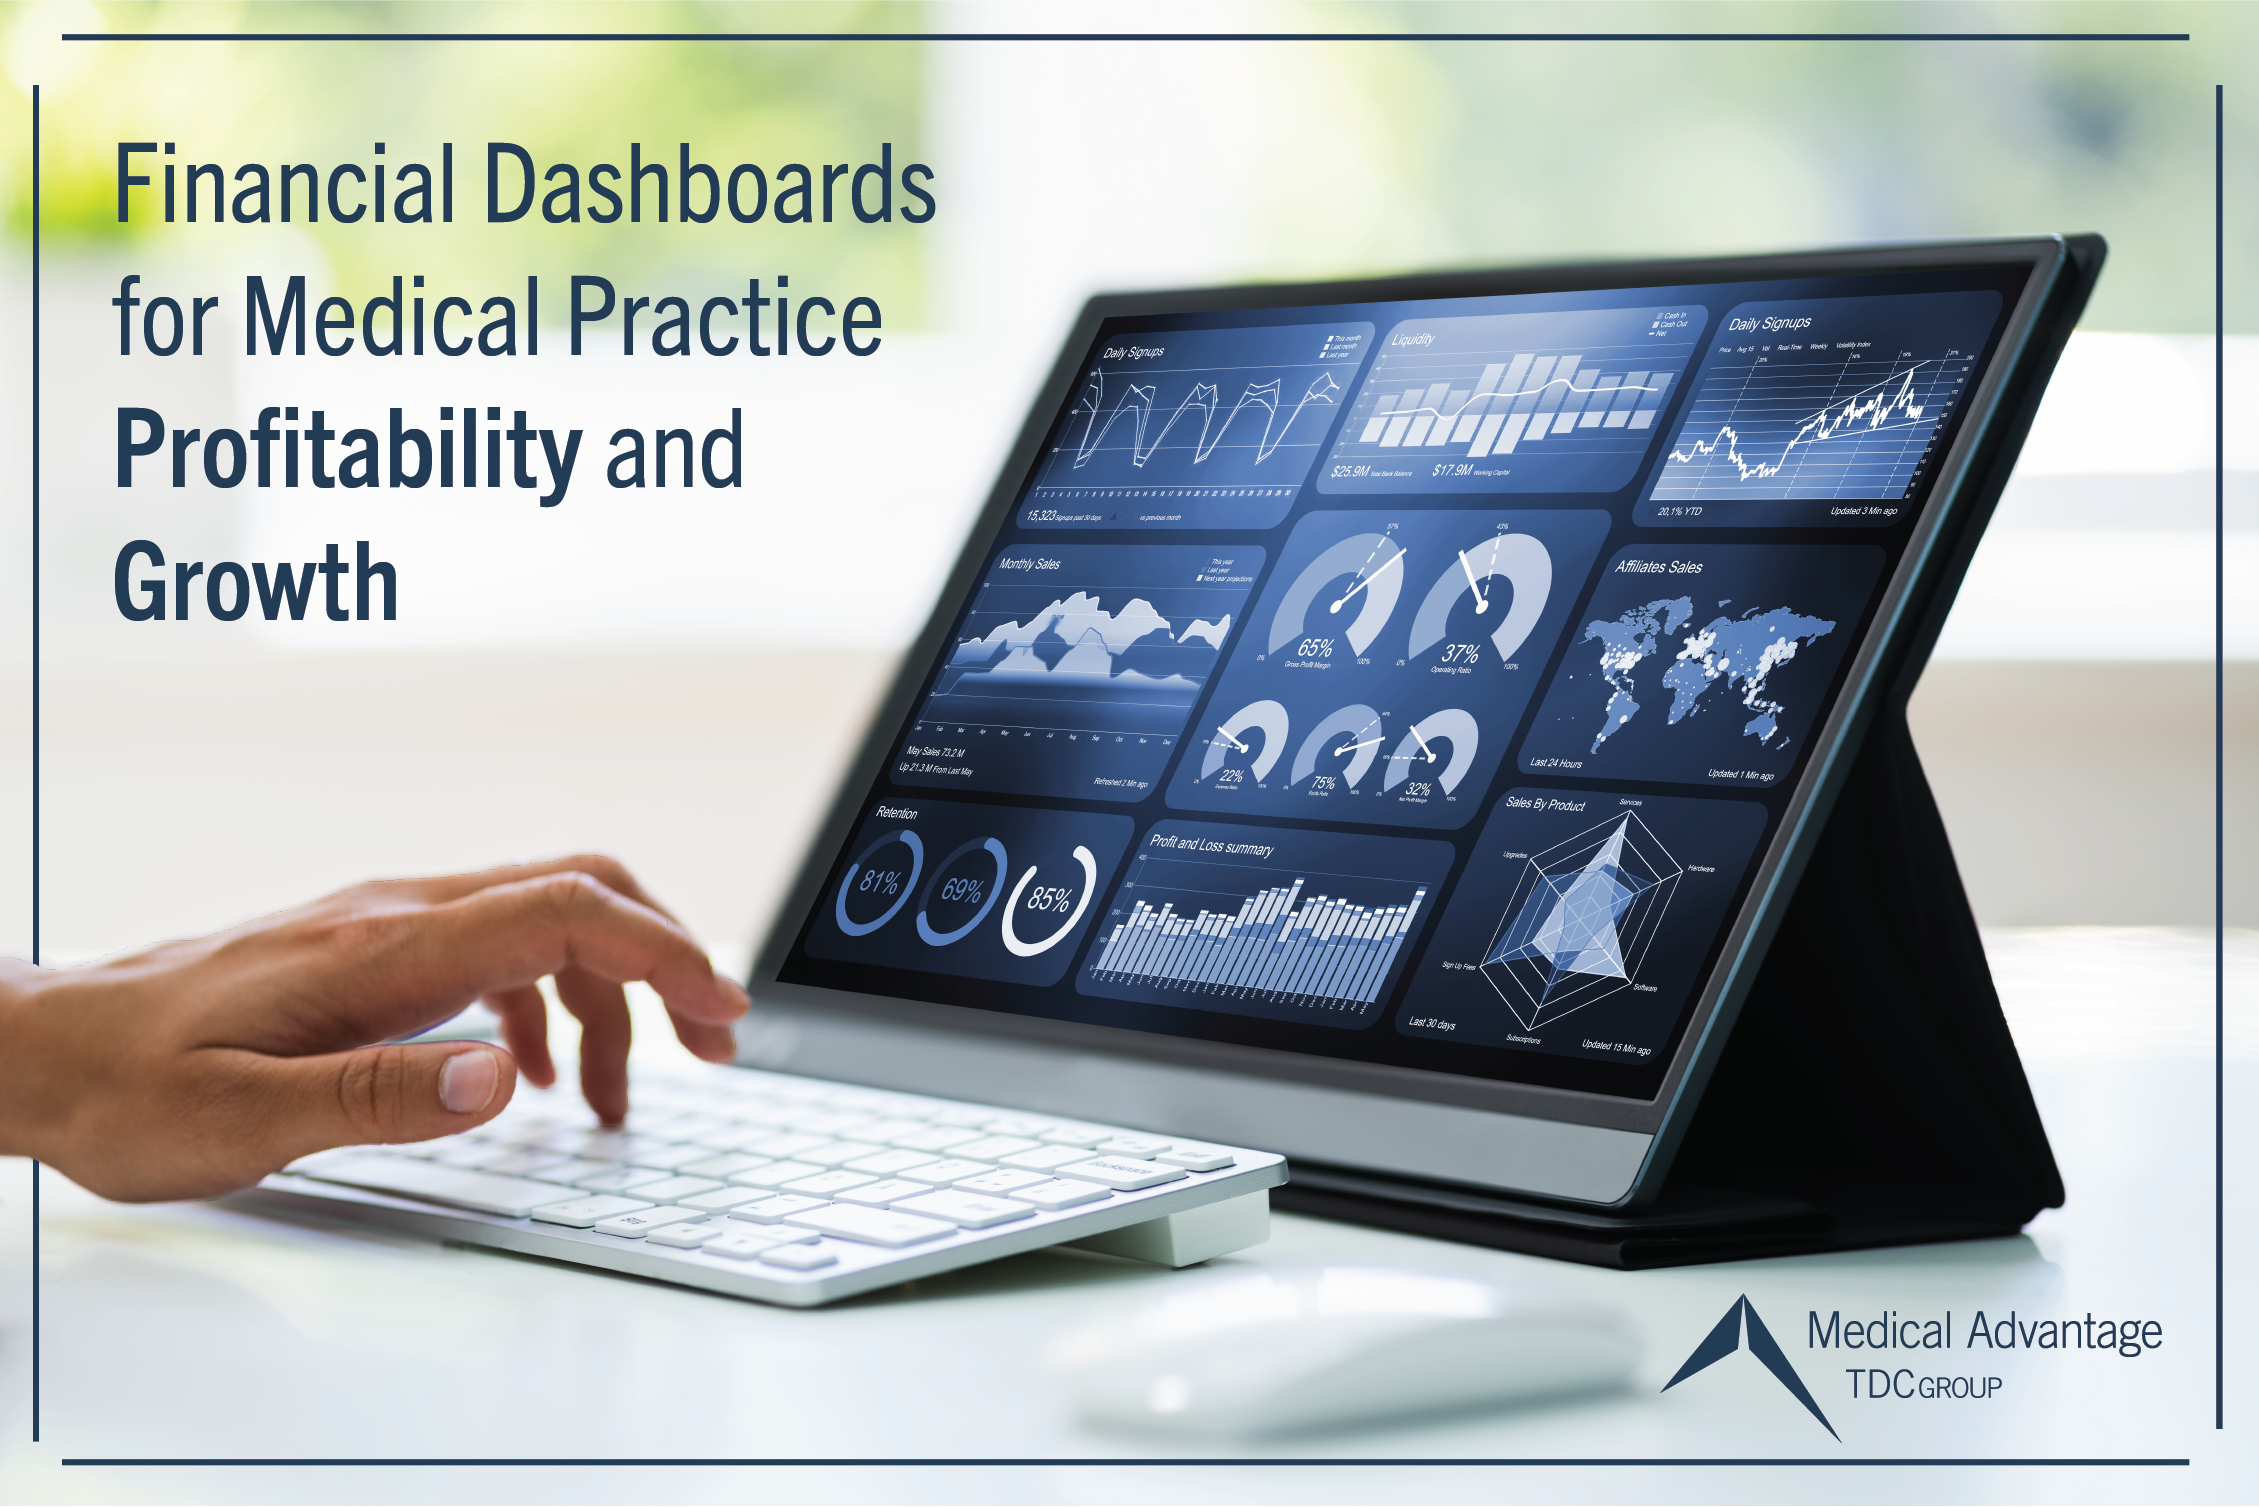 Financial dashboards for medical practice profitability and growth